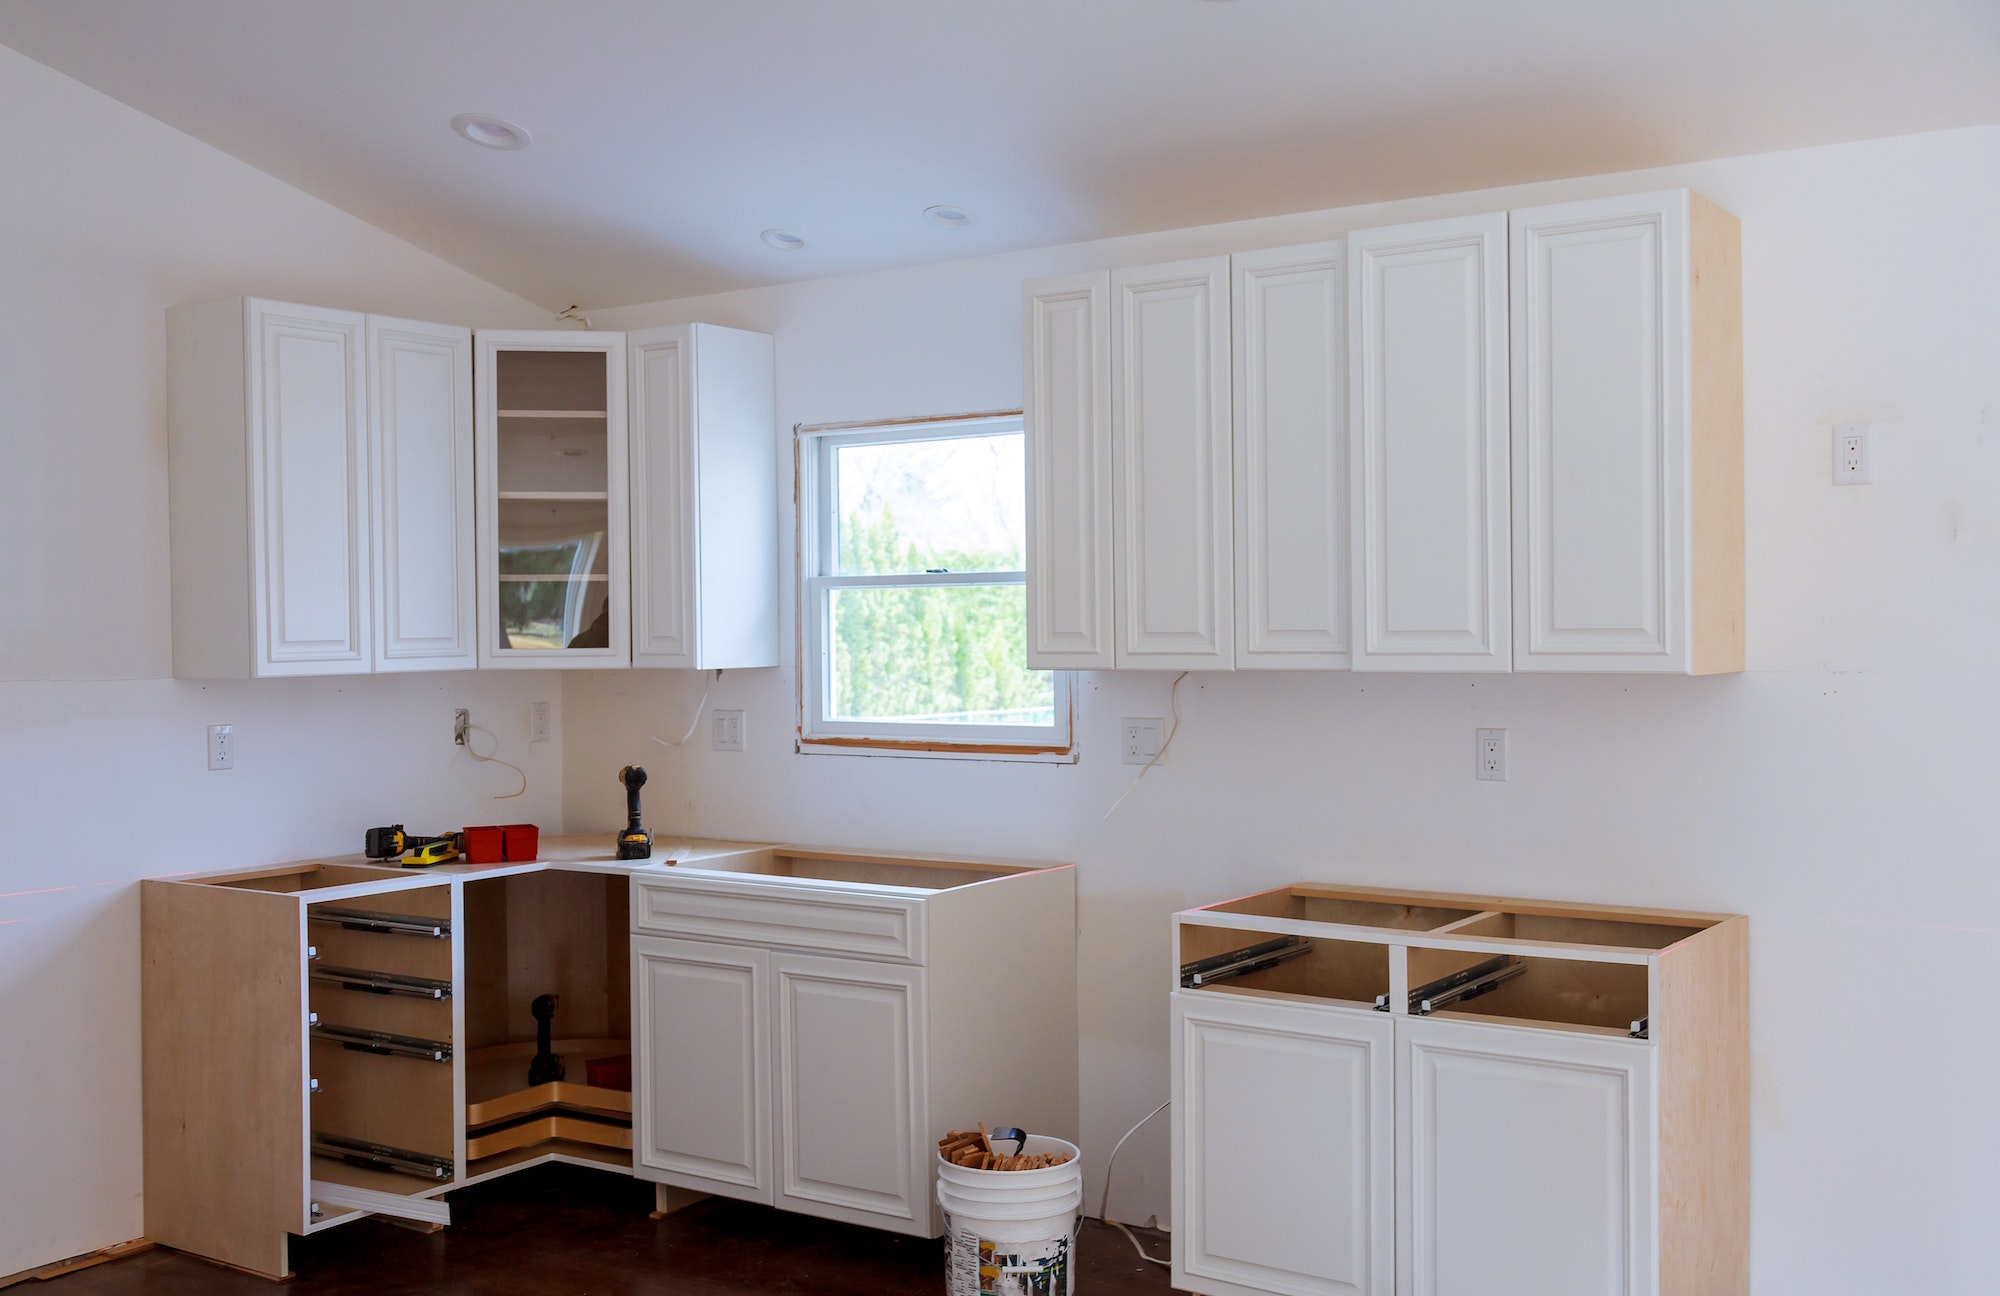 Kitchen remodel furniture installation accessories and tools adjustment on kitchen cabinets